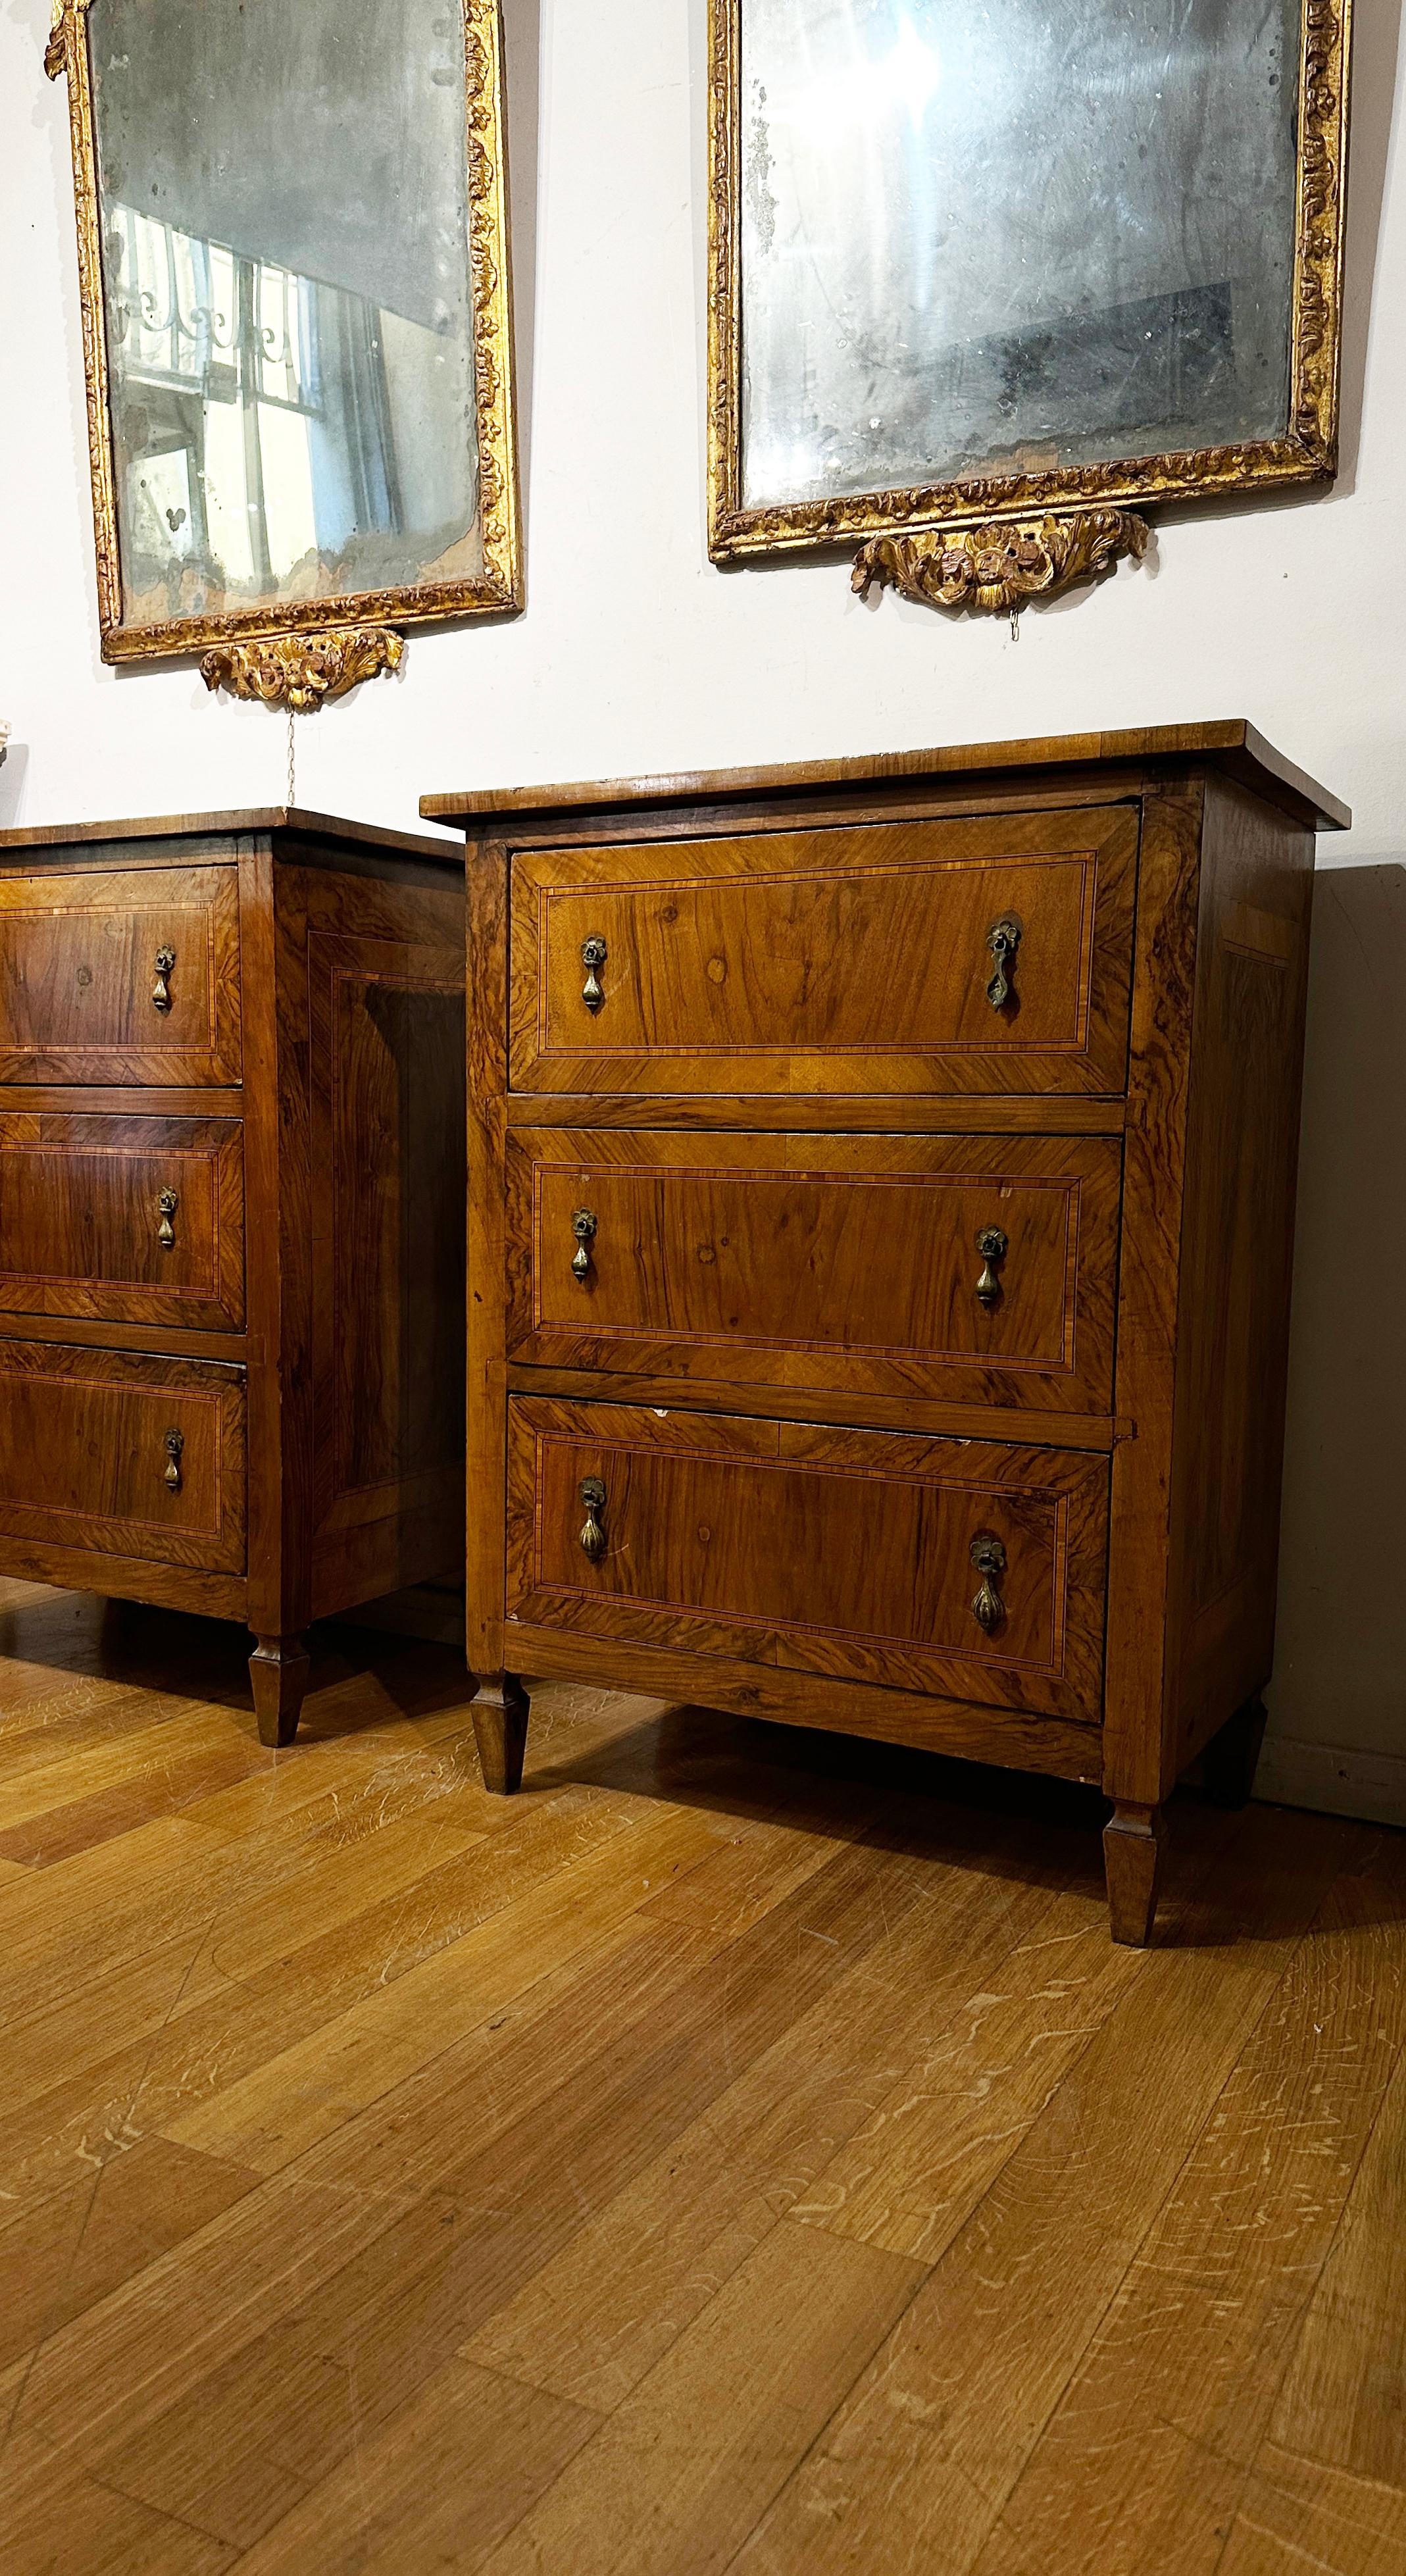 Neoclassical Revival END OF THE 18th CENTURY VENETIAN SMALL-DRAWERS